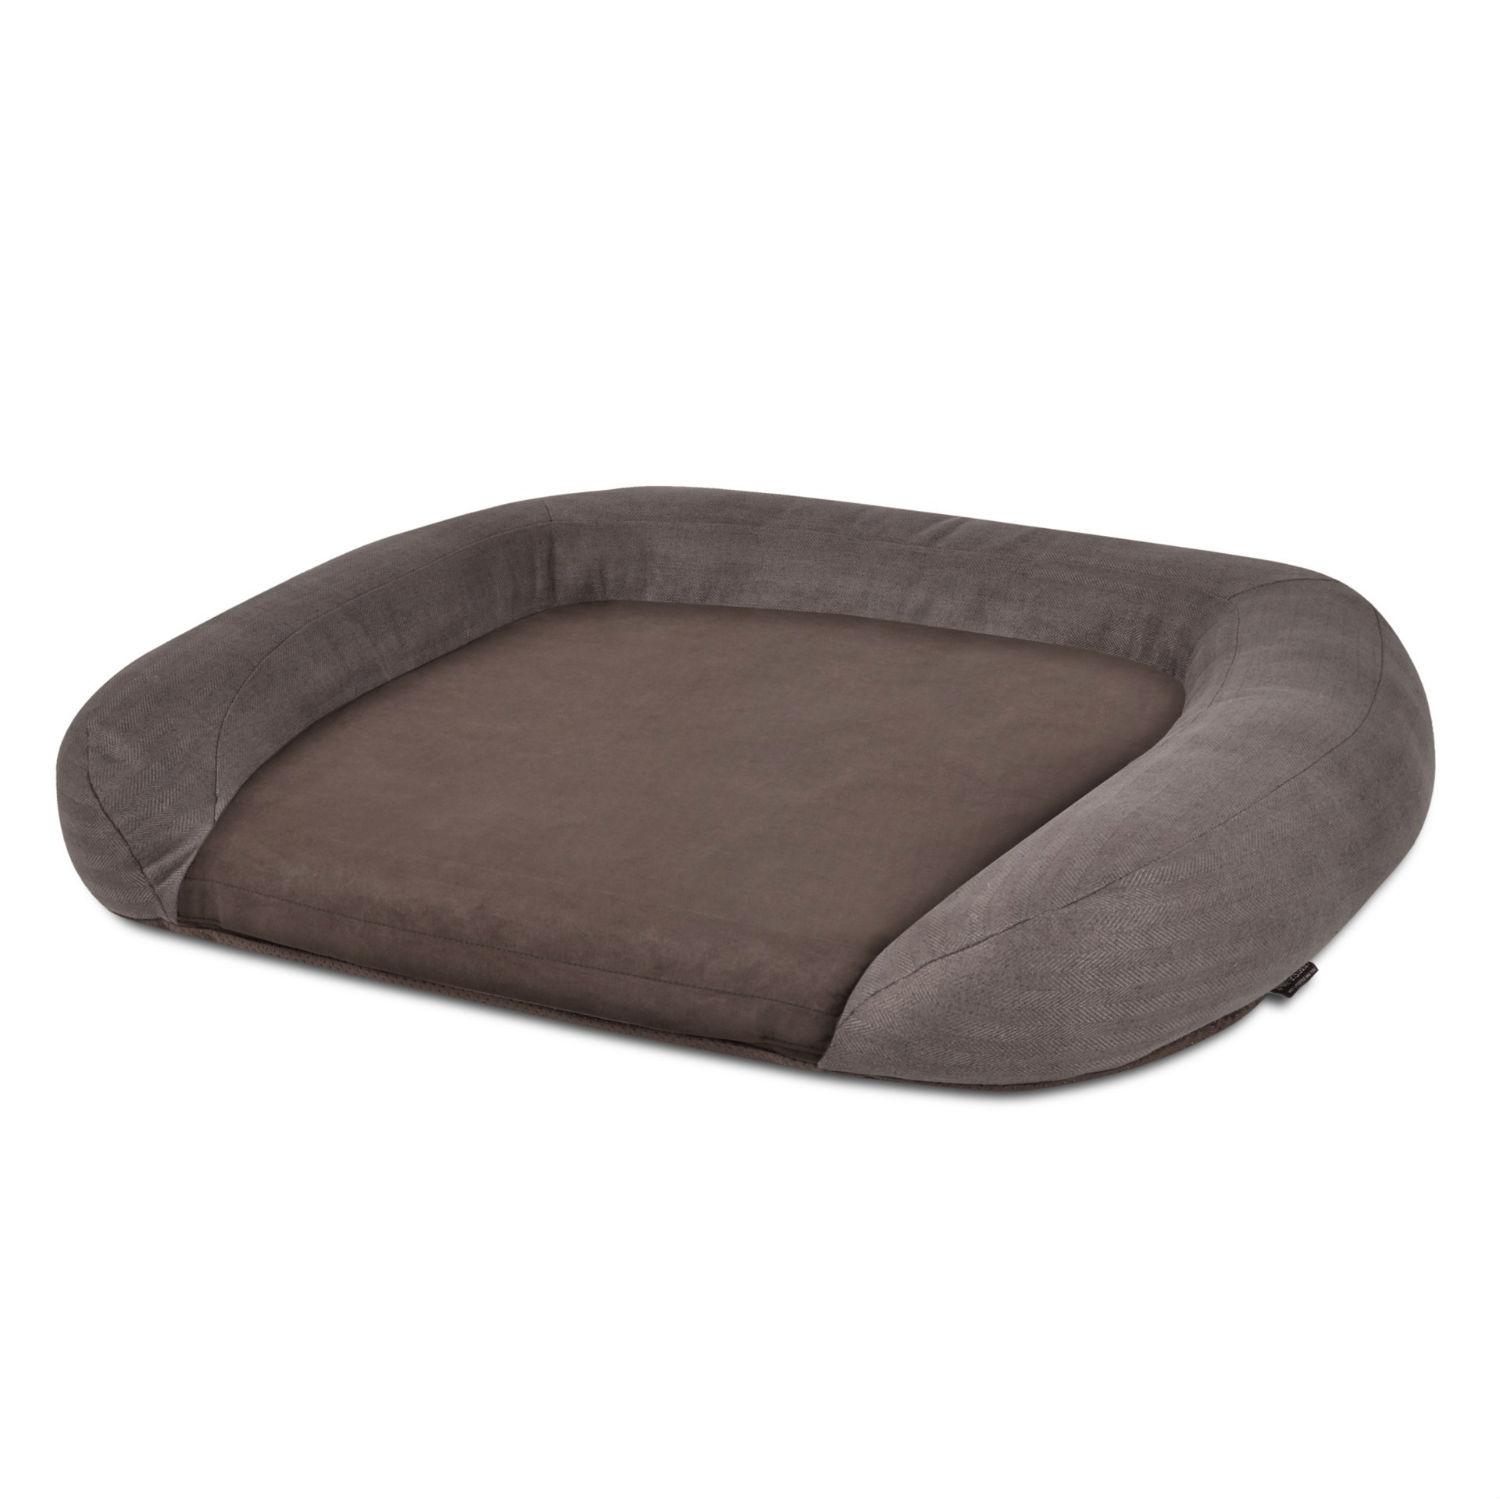 P.L.A.Y. California Dreaming Memory Foam Lounger Dog Bed - Big Sur Brown